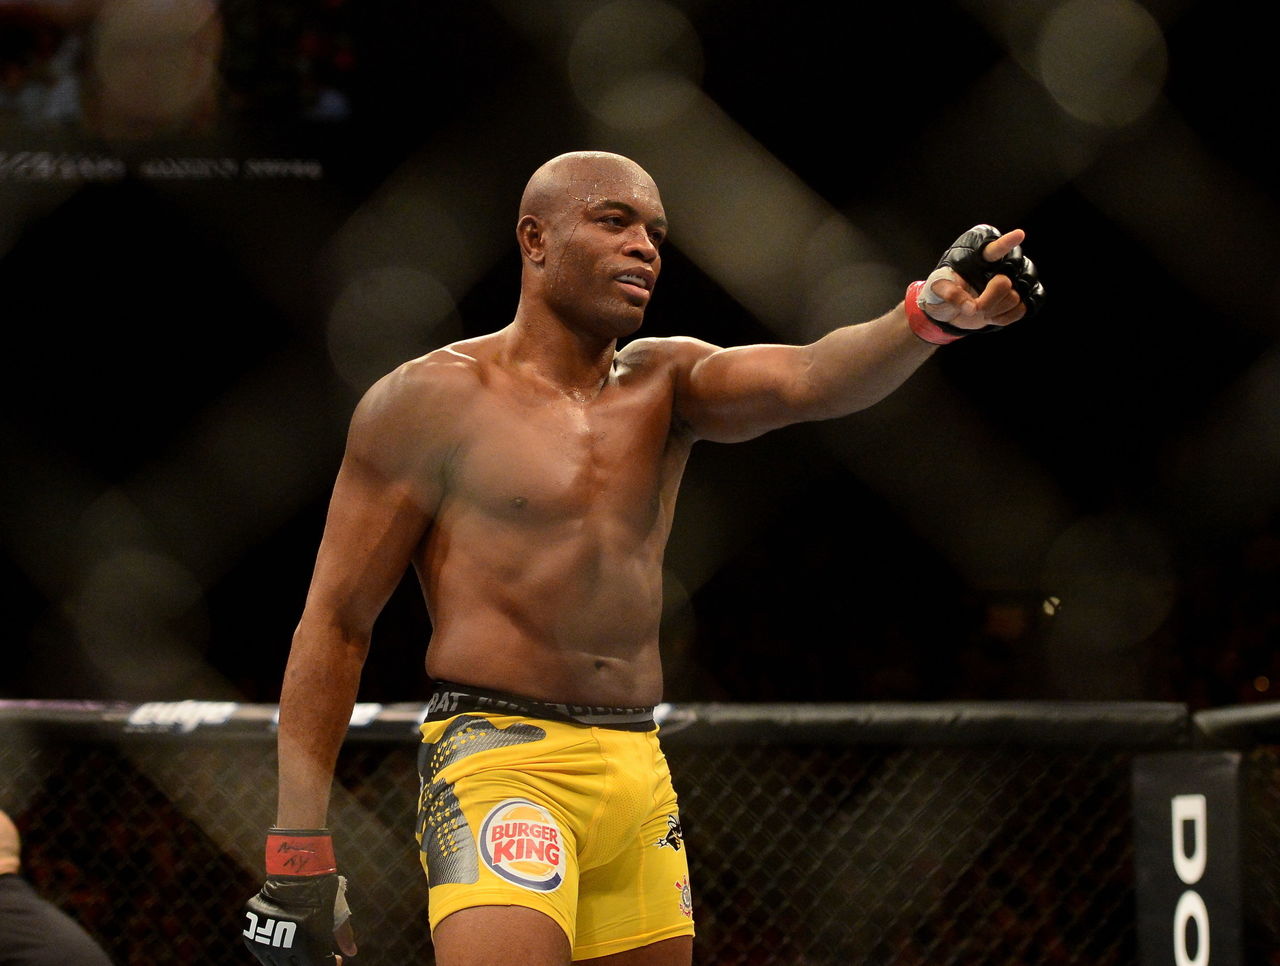 Anderson Silva's Open Workout - Anderson Silva Next Fight , HD Wallpaper & Backgrounds